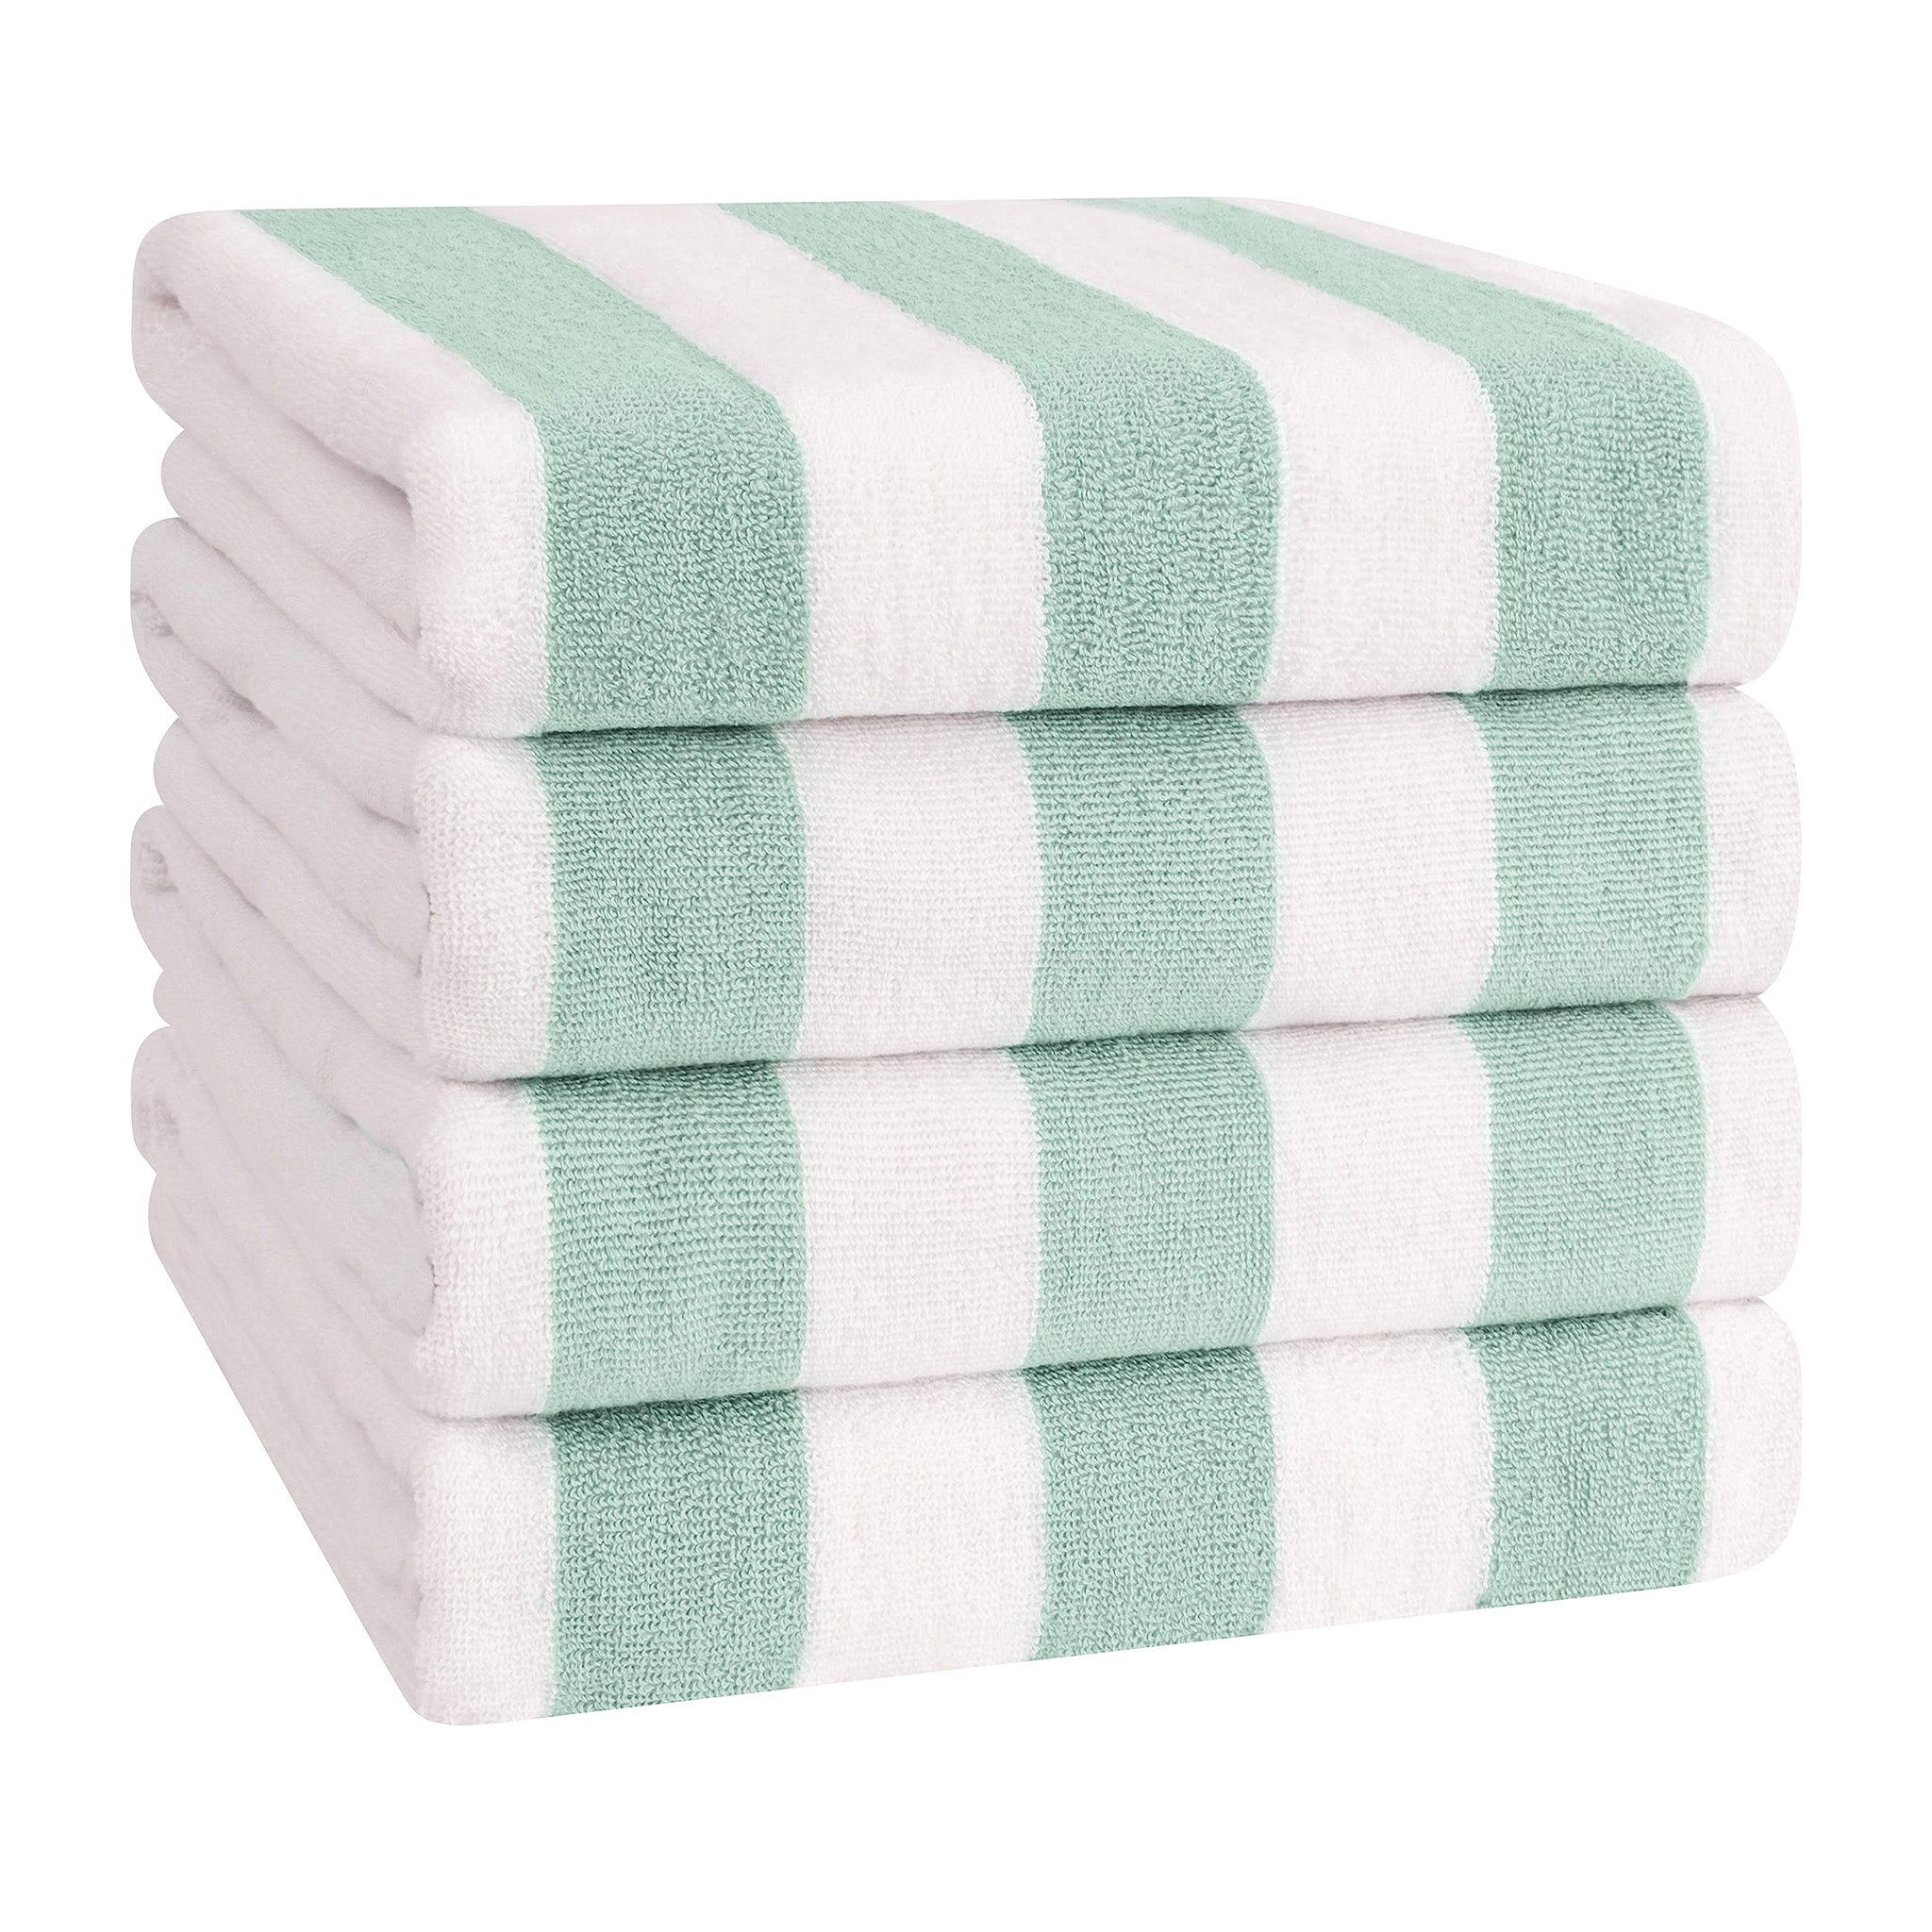 American Soft Linen 100% Cotton 4 Pack Beach Towels Cabana Striped Pool Towels -mint-1